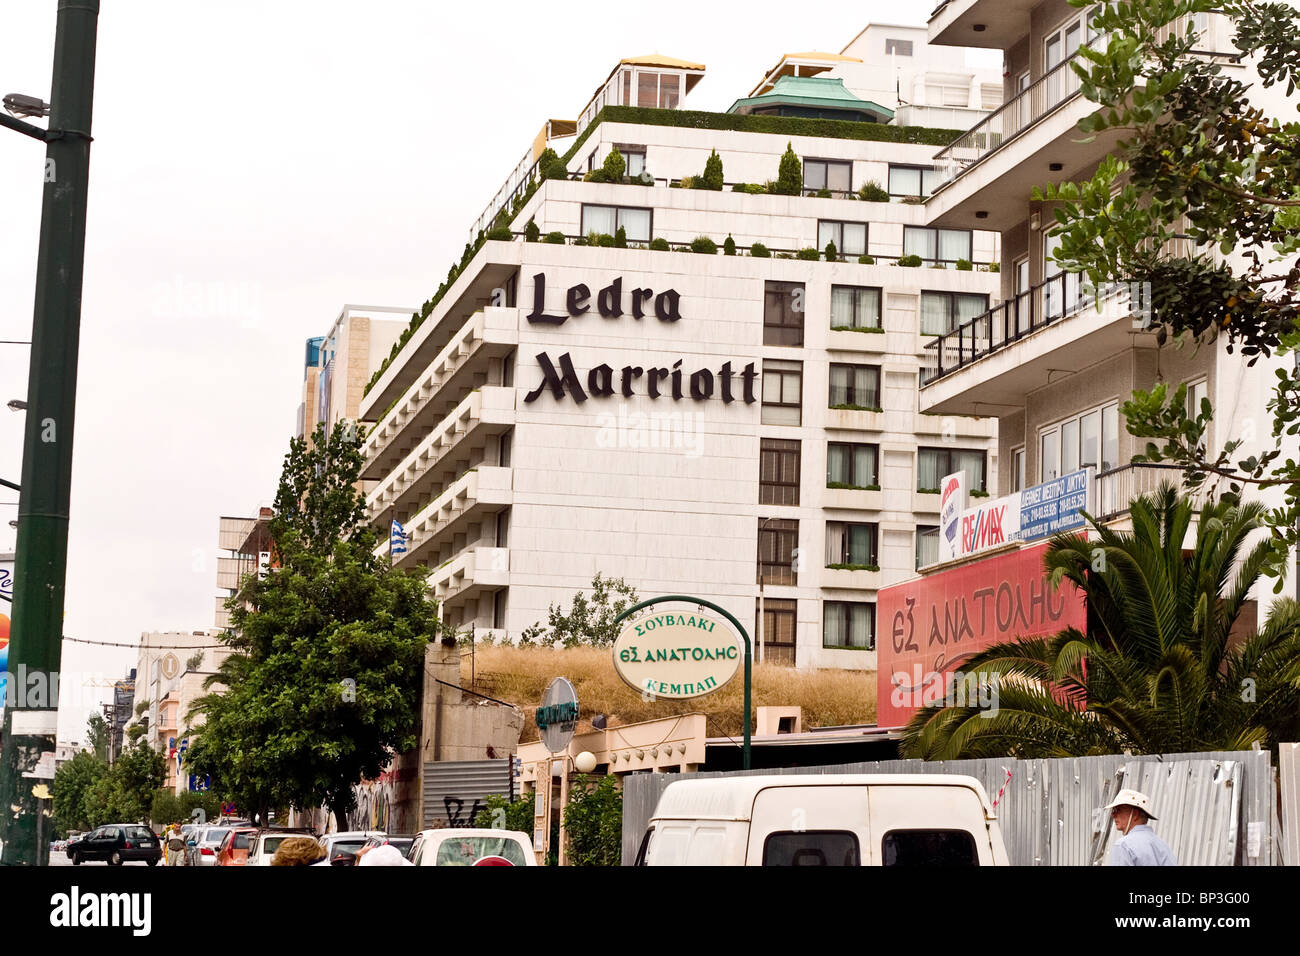 The Ledra Marriott Hotel in Downtown Athens, Greece © Myrleen Pearson Stock Photo